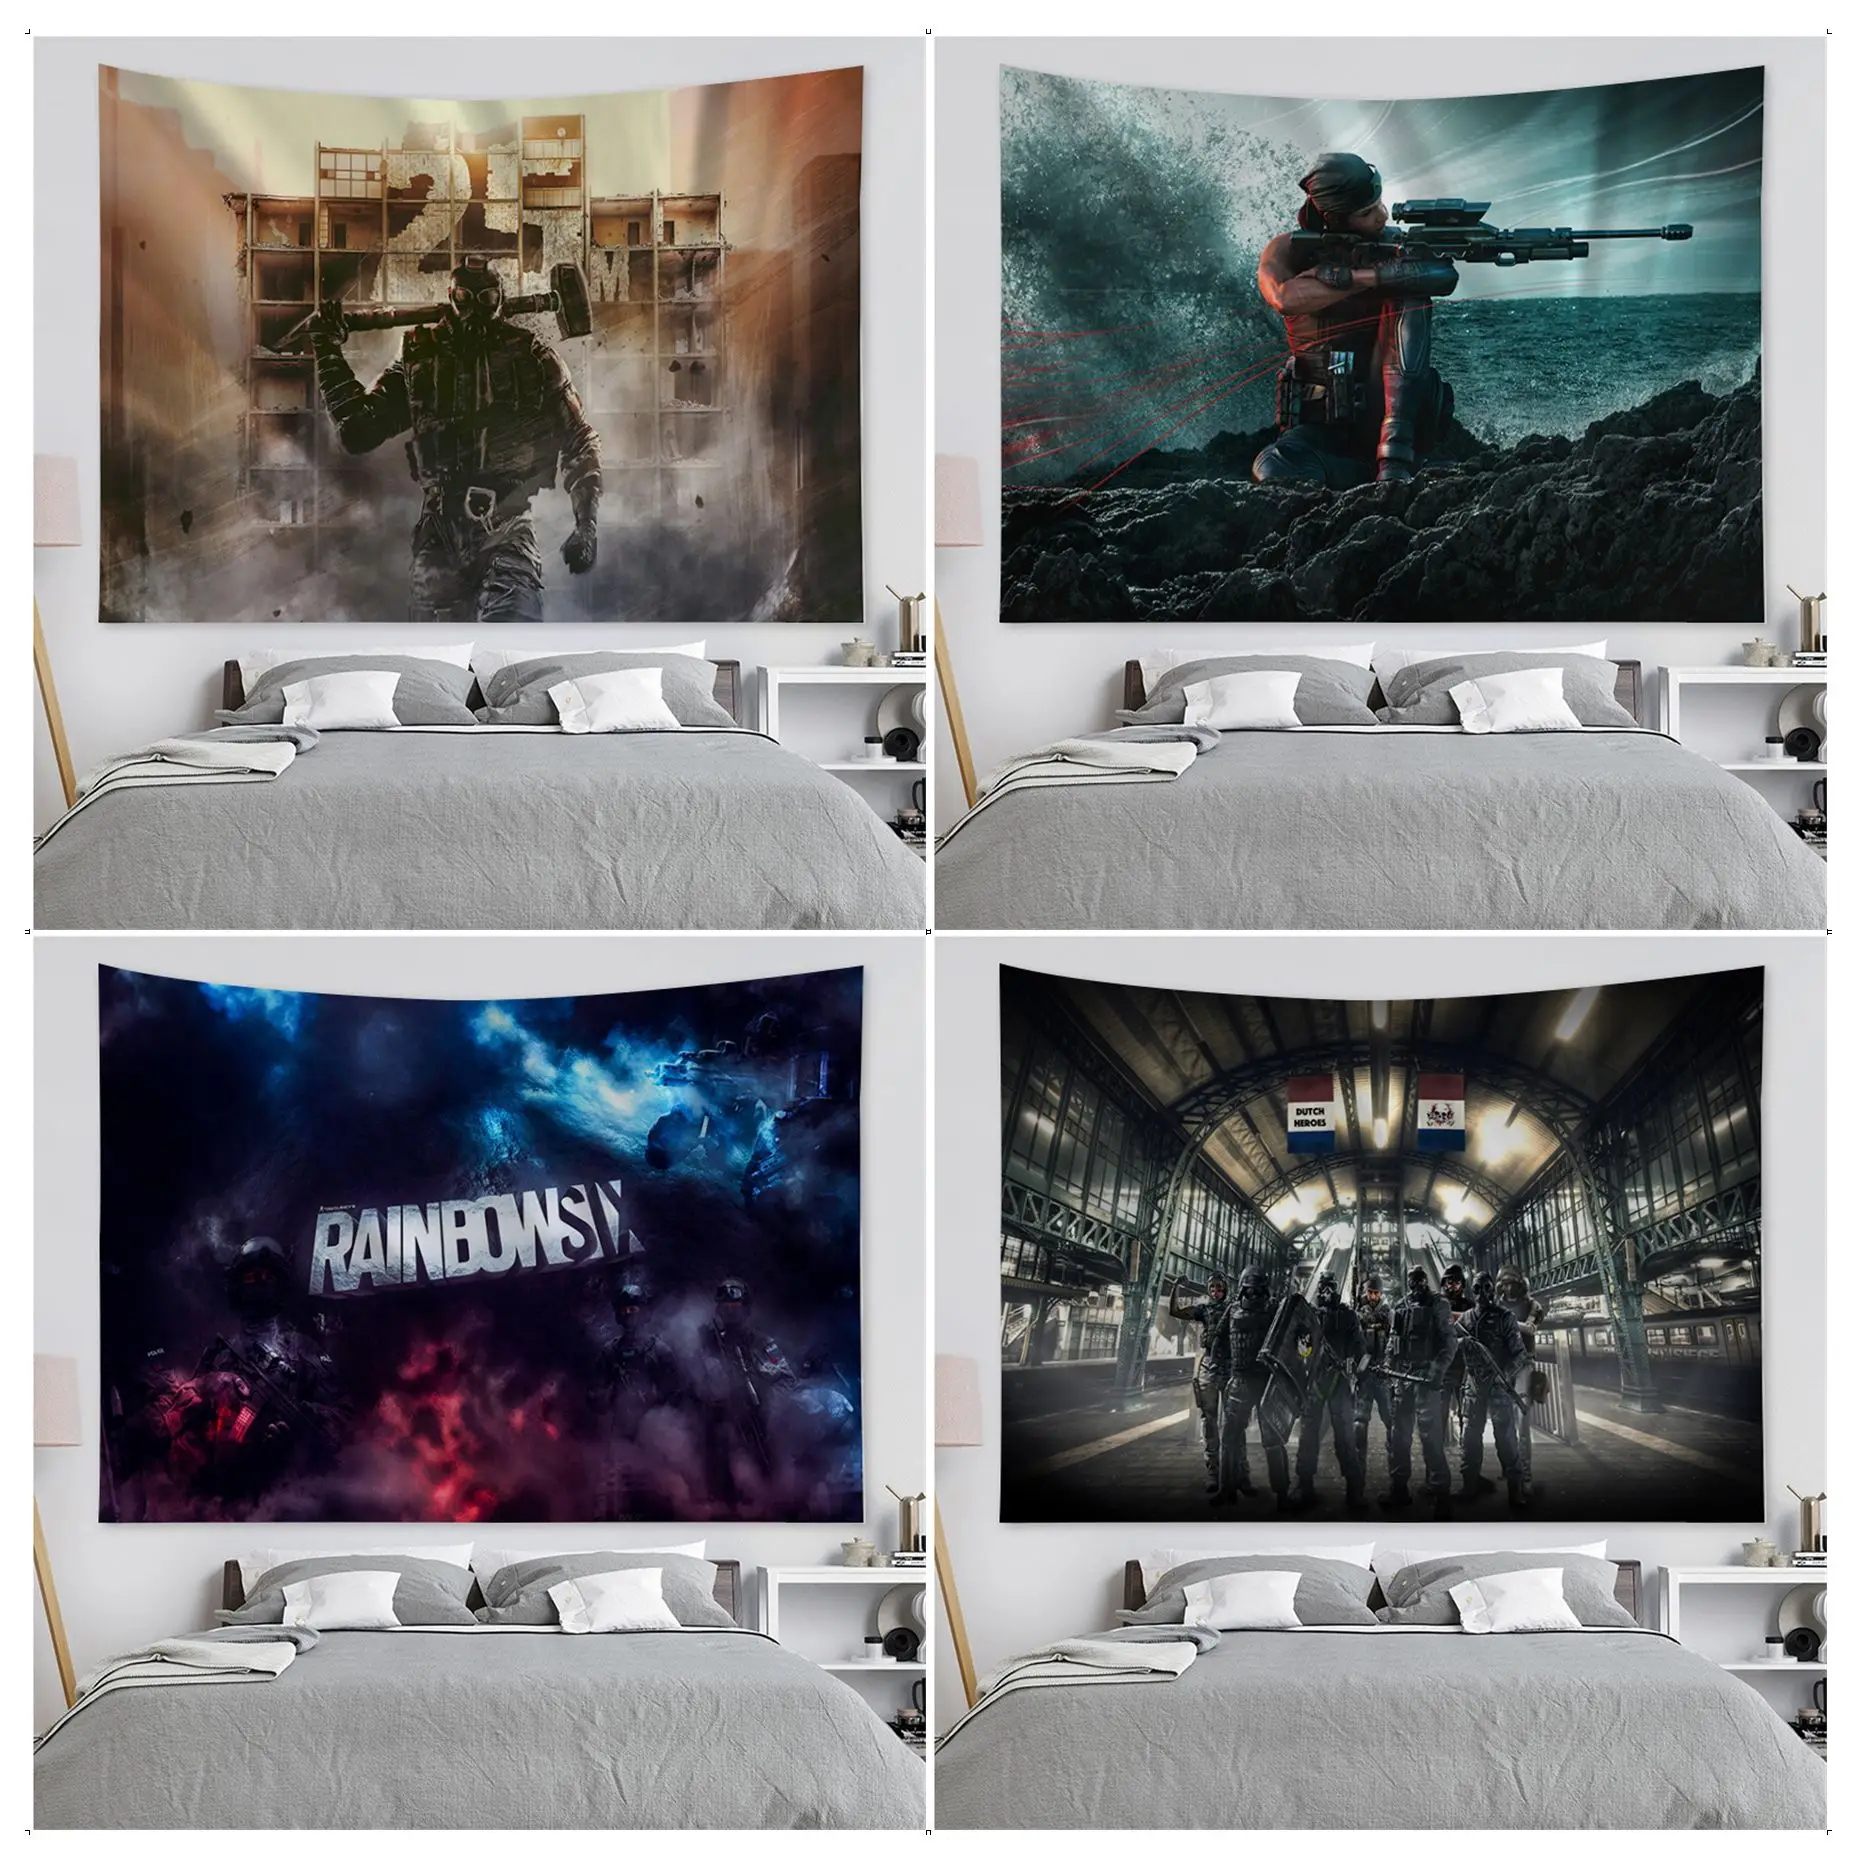 

Rainbow Six Siege Wall Tapestry For Living Room Home Dorm Decor Wall Hanging Home Decor